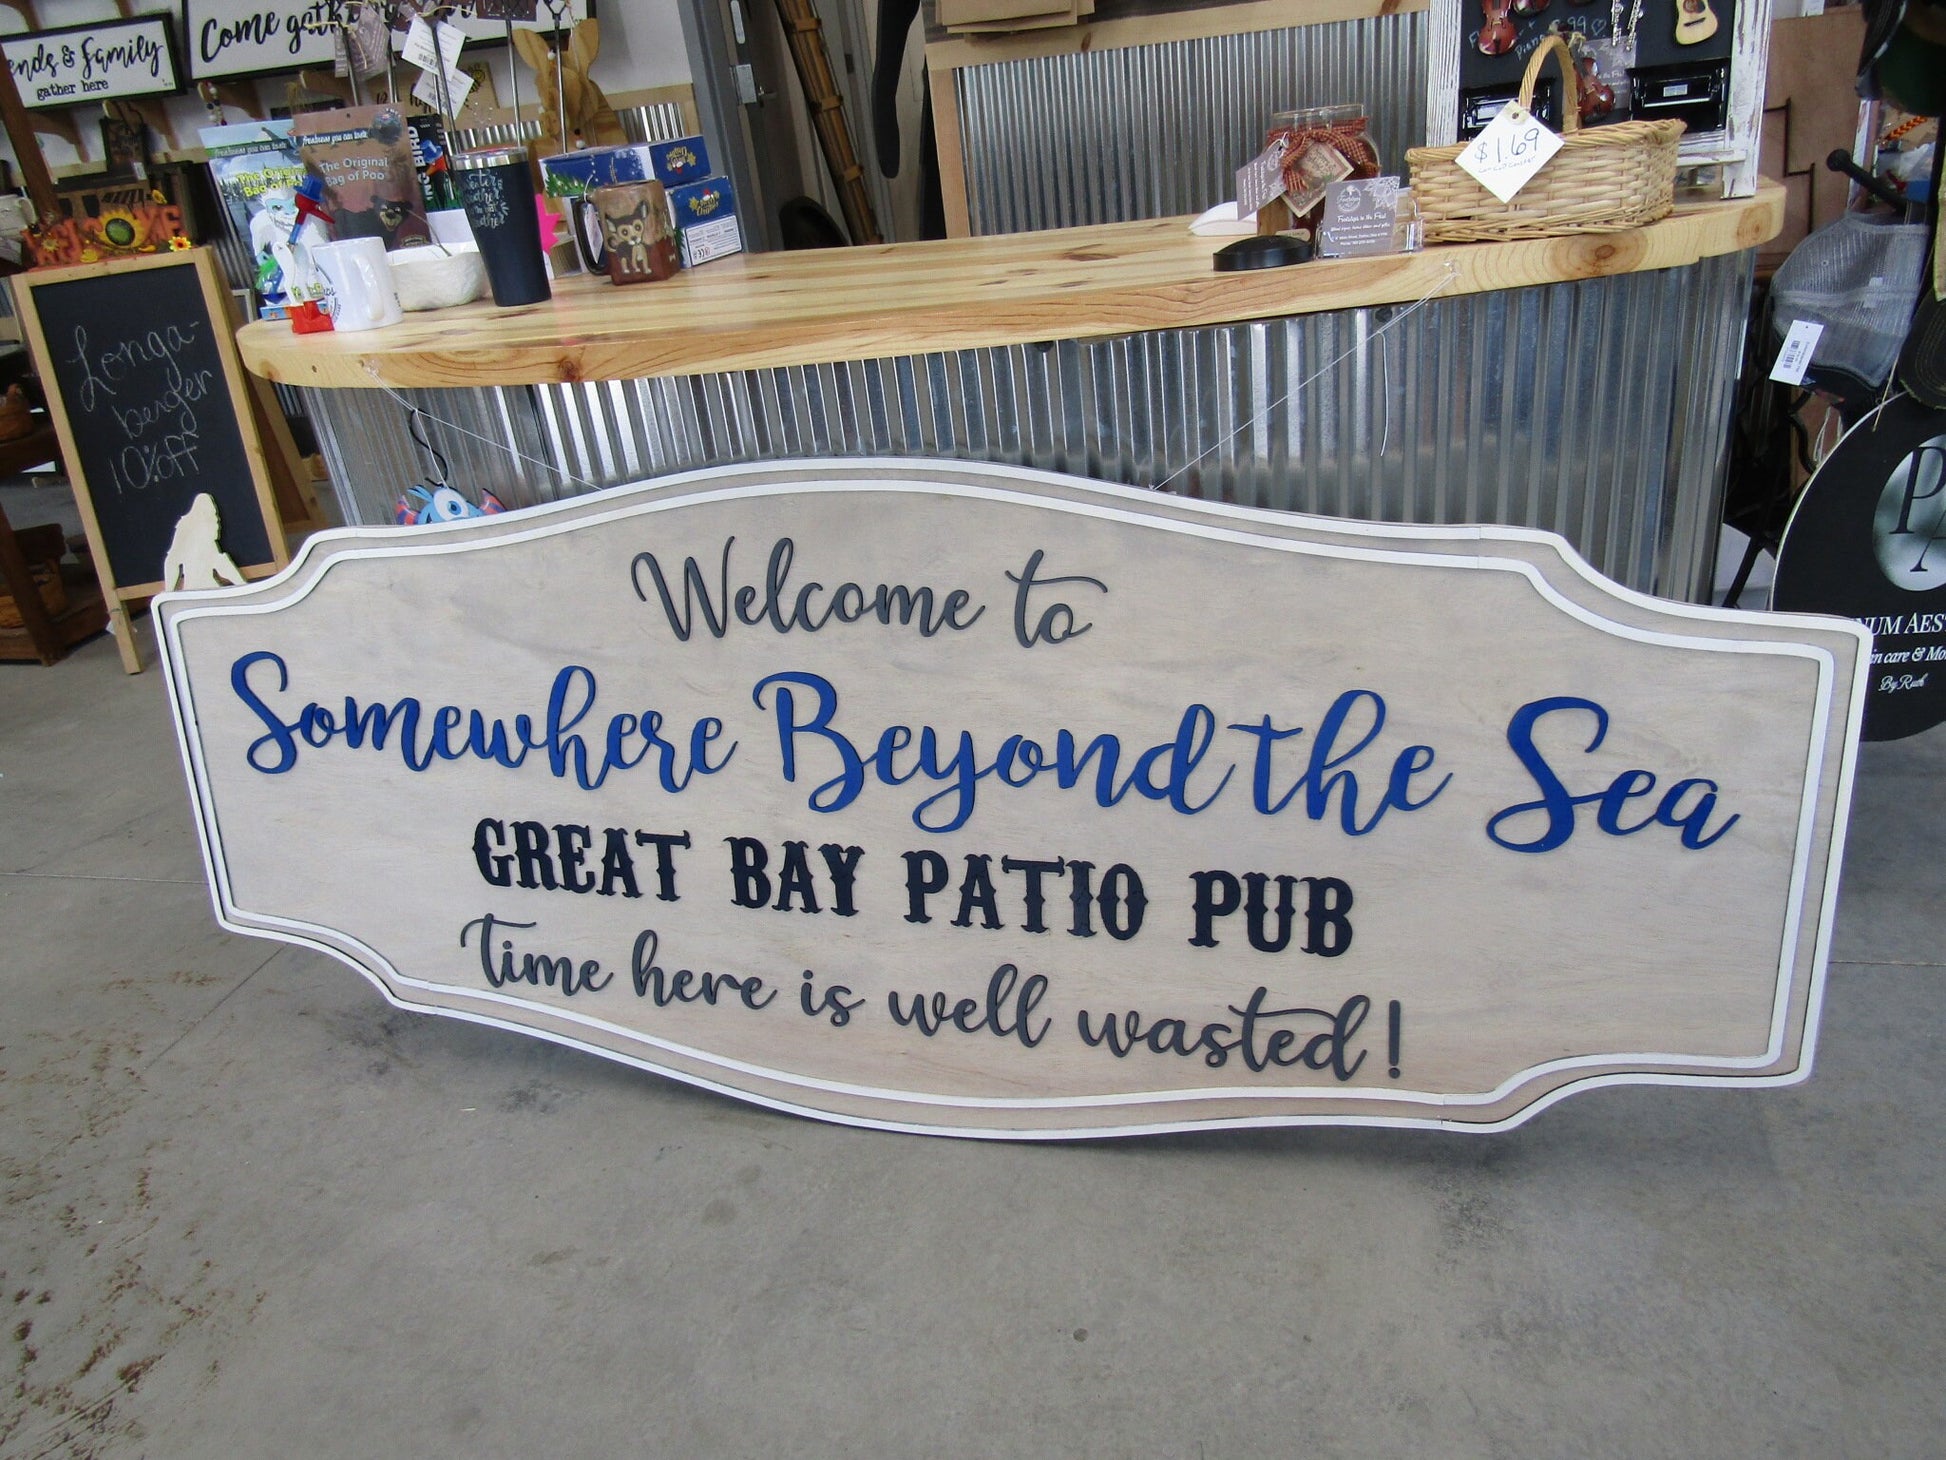 Custom Handmade Wood Sign Pub Signage Commerical Business Sign Your Logo Image Patio Food Drinks Eatery Large Made To Order Personalized